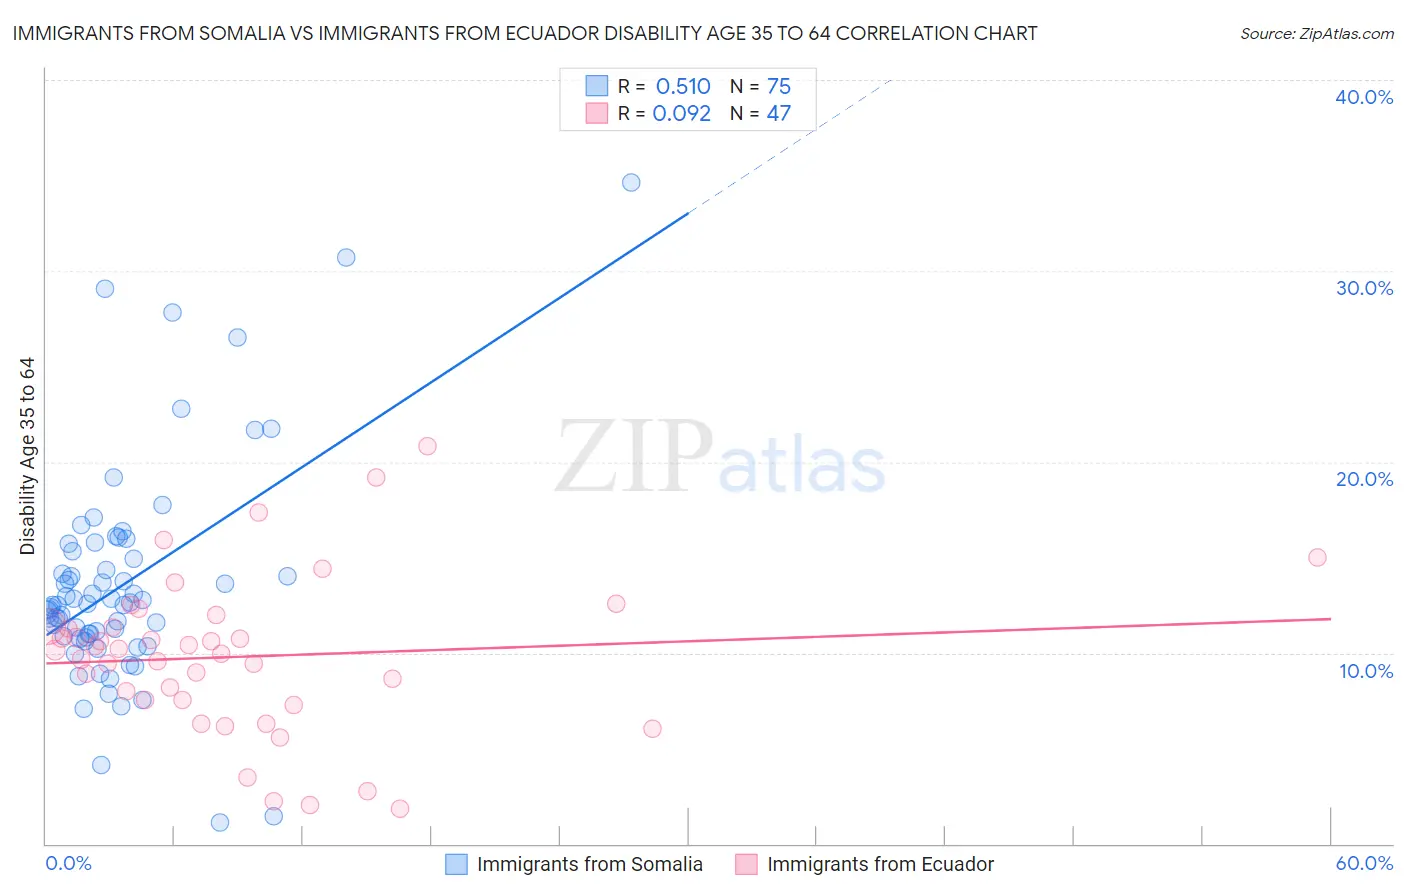 Immigrants from Somalia vs Immigrants from Ecuador Disability Age 35 to 64